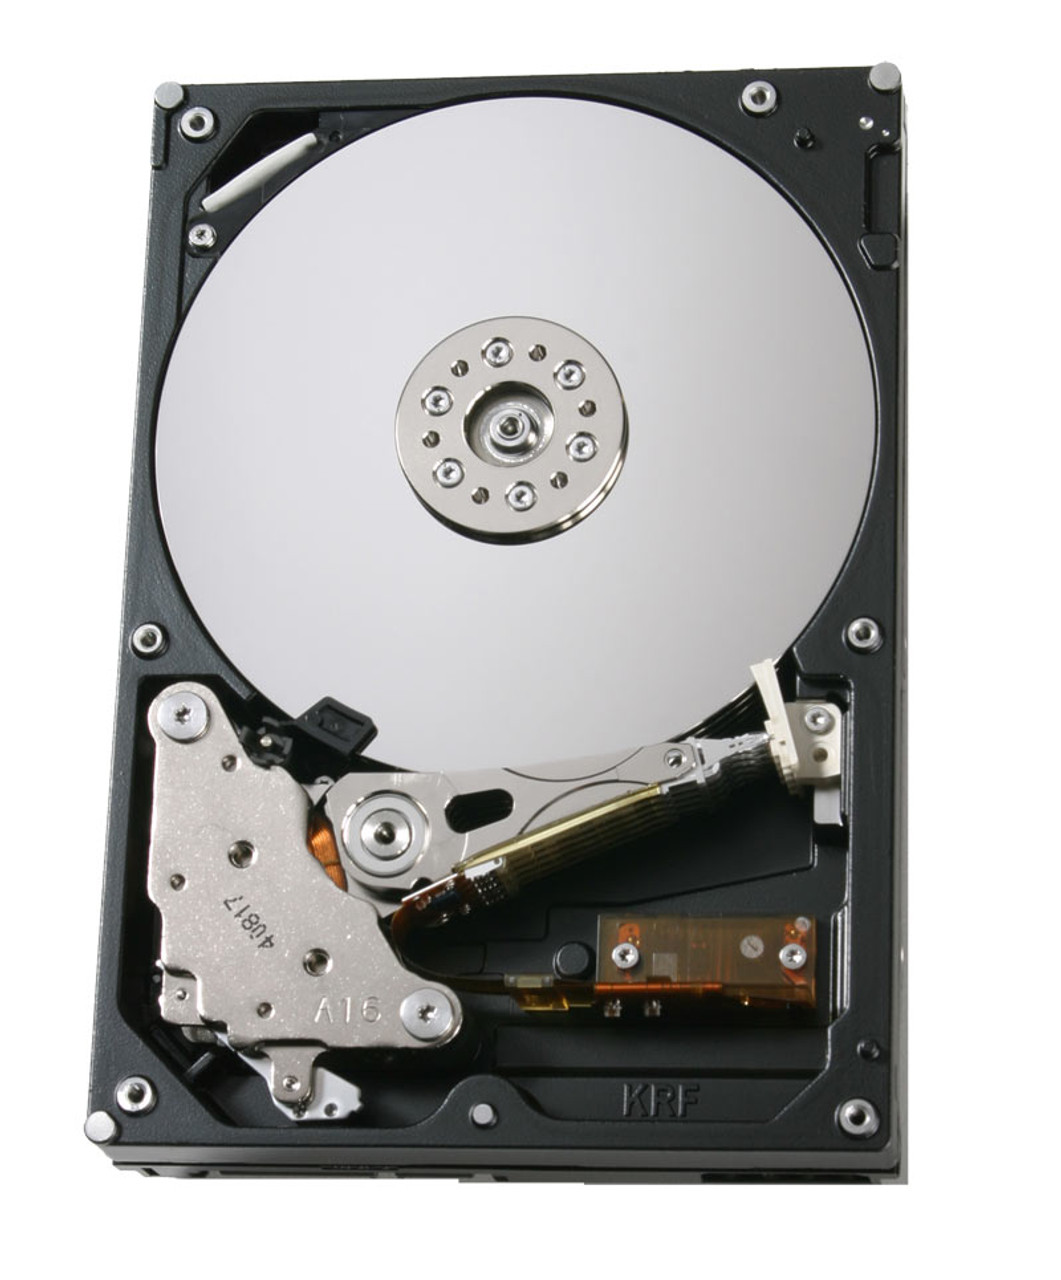 【パーツ】3.5 SATA 3TB 1台 正常 Hitachi HDS723030ALA640 使用時間63967H ■HDD1388